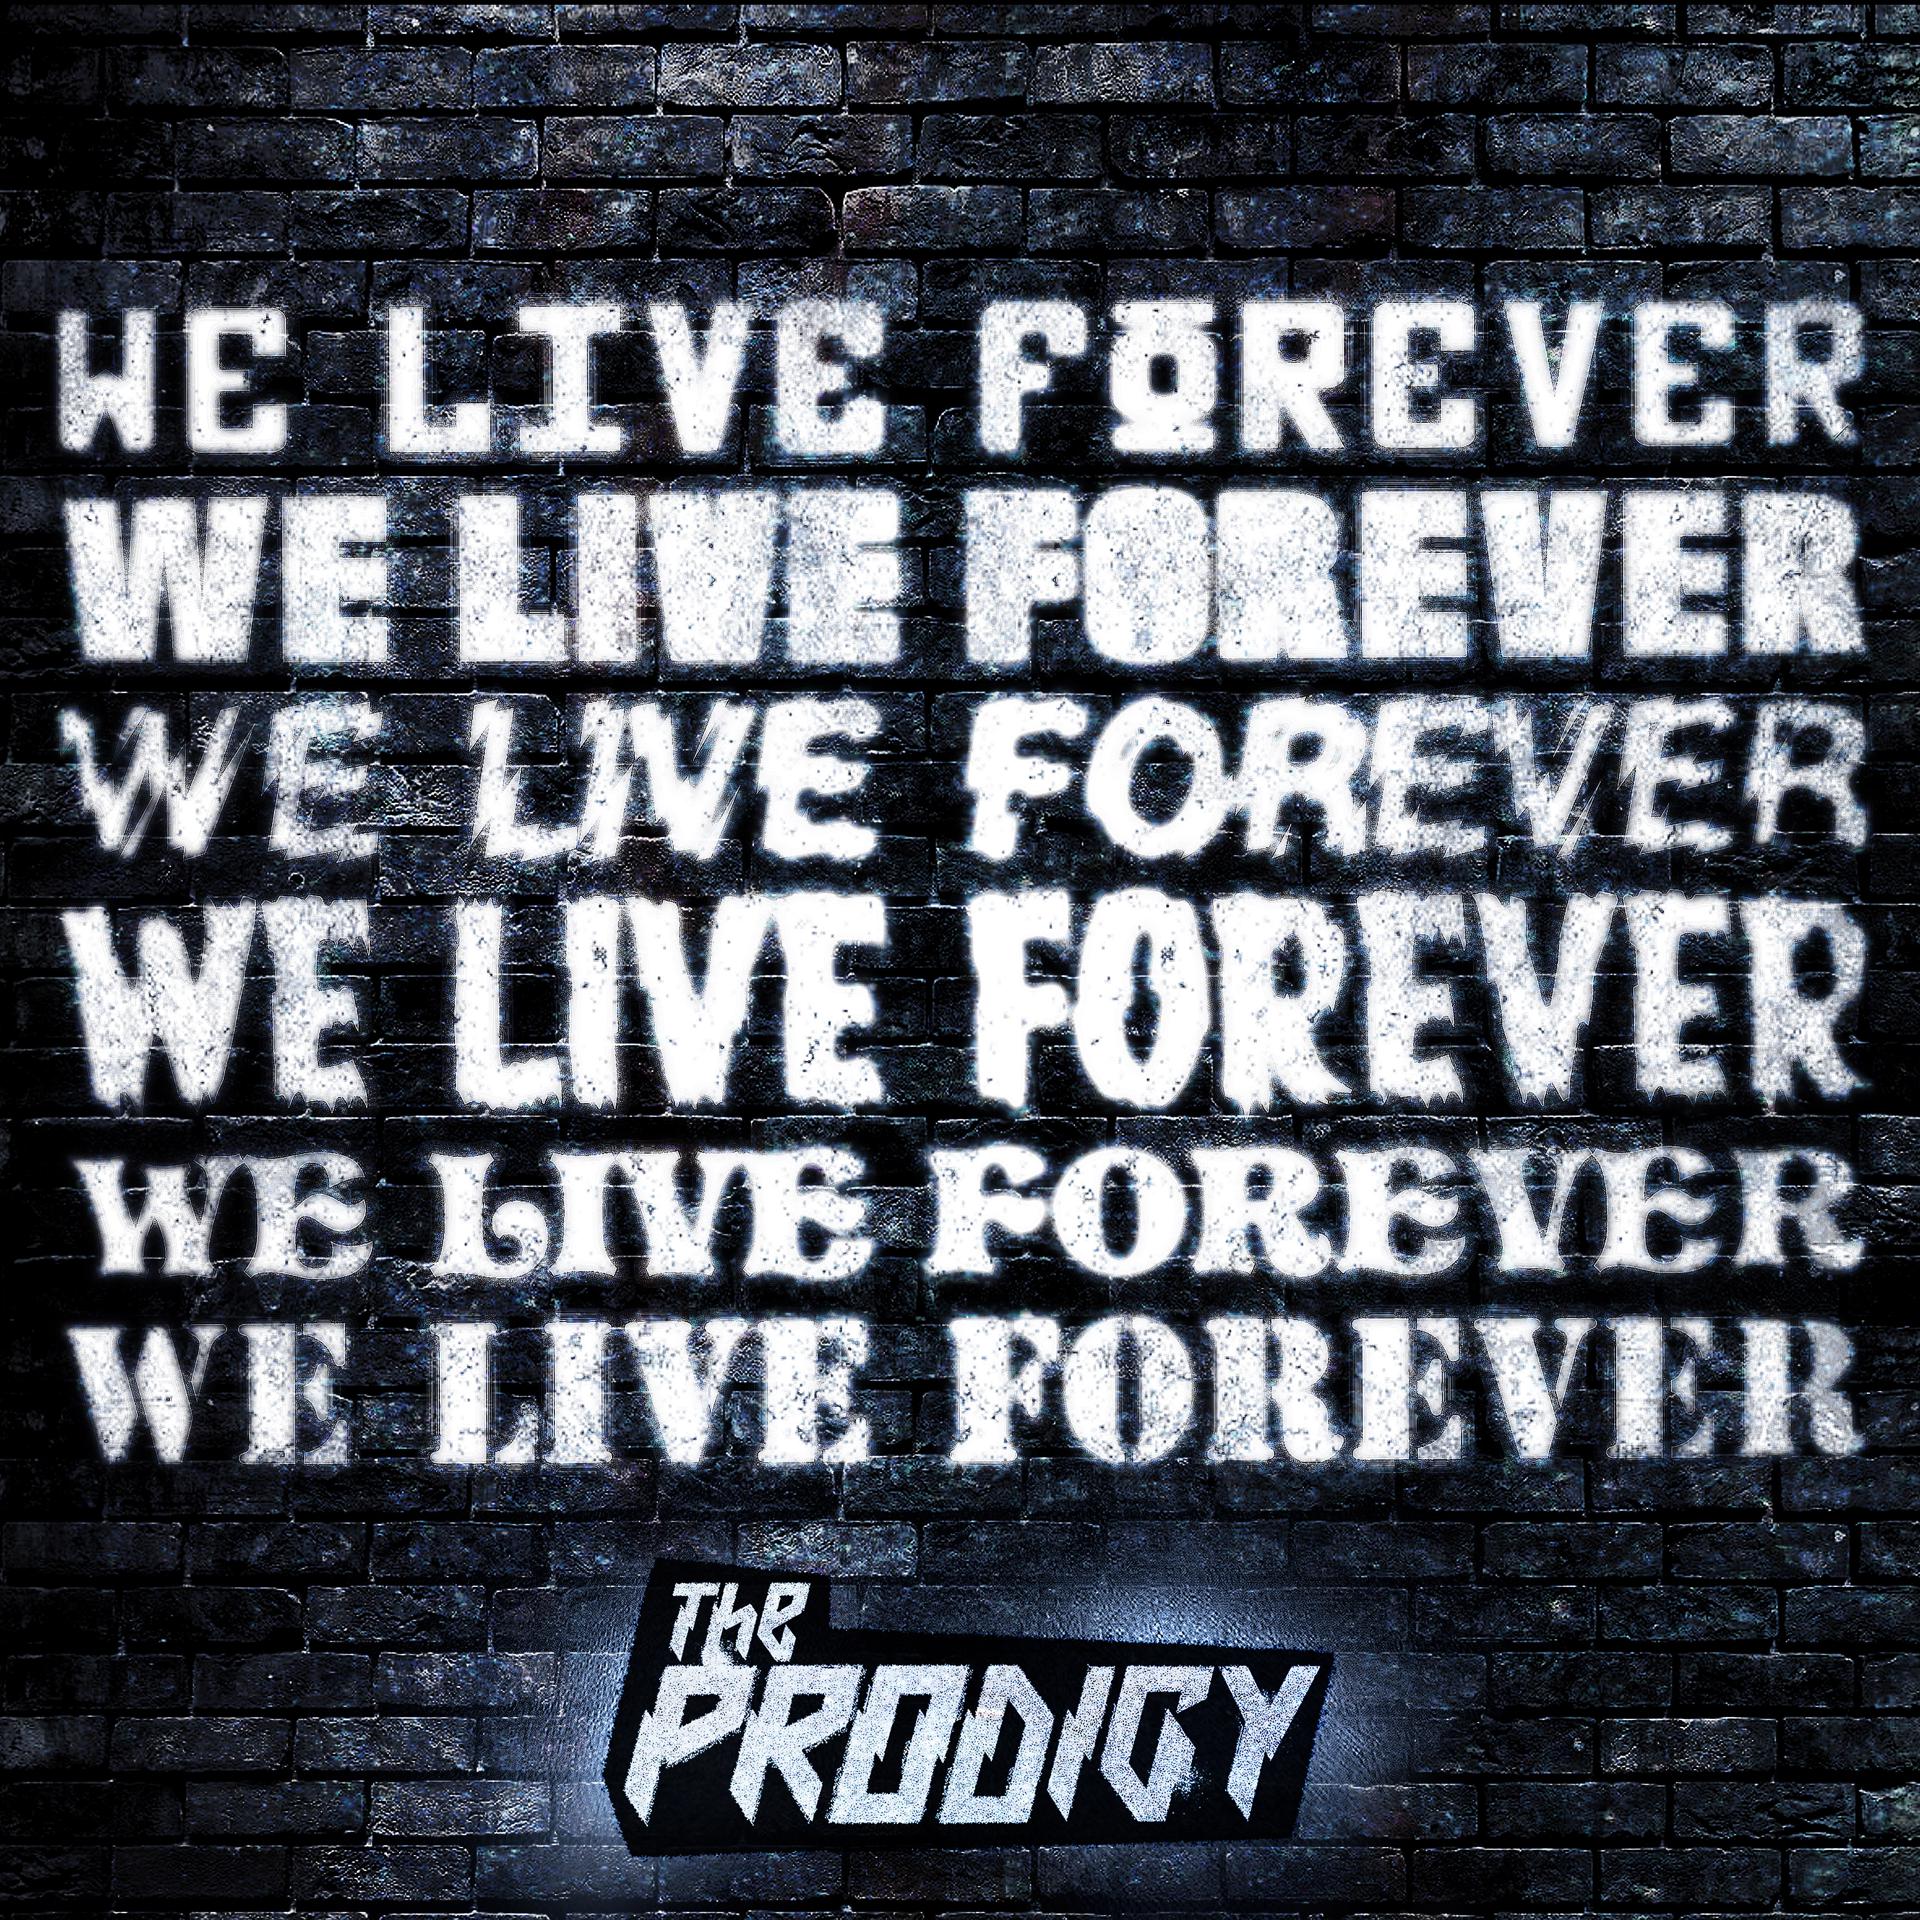 Live forever текст. We Live Forever the Prodigy. We Live Forever. The Prodigy - we Live Forever (2018). We Live Forever the Prodigy обложка.